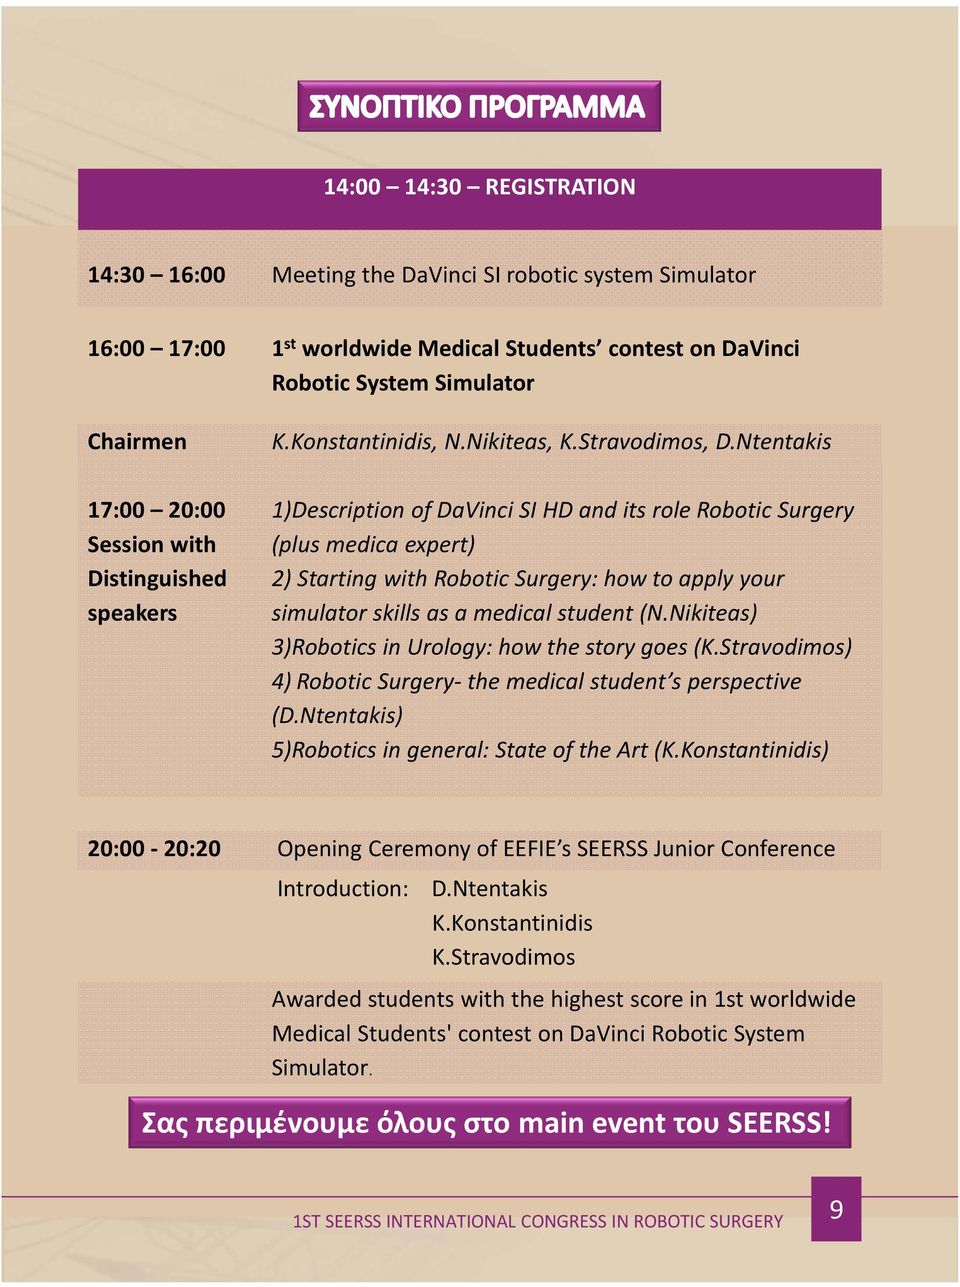 Ntentakis 1)Description of DaVinci SI HD and its role Robotic Surgery (plus medica expert) 2) Starting with Robotic Surgery: how to apply your simulator skills as a medical student (N.